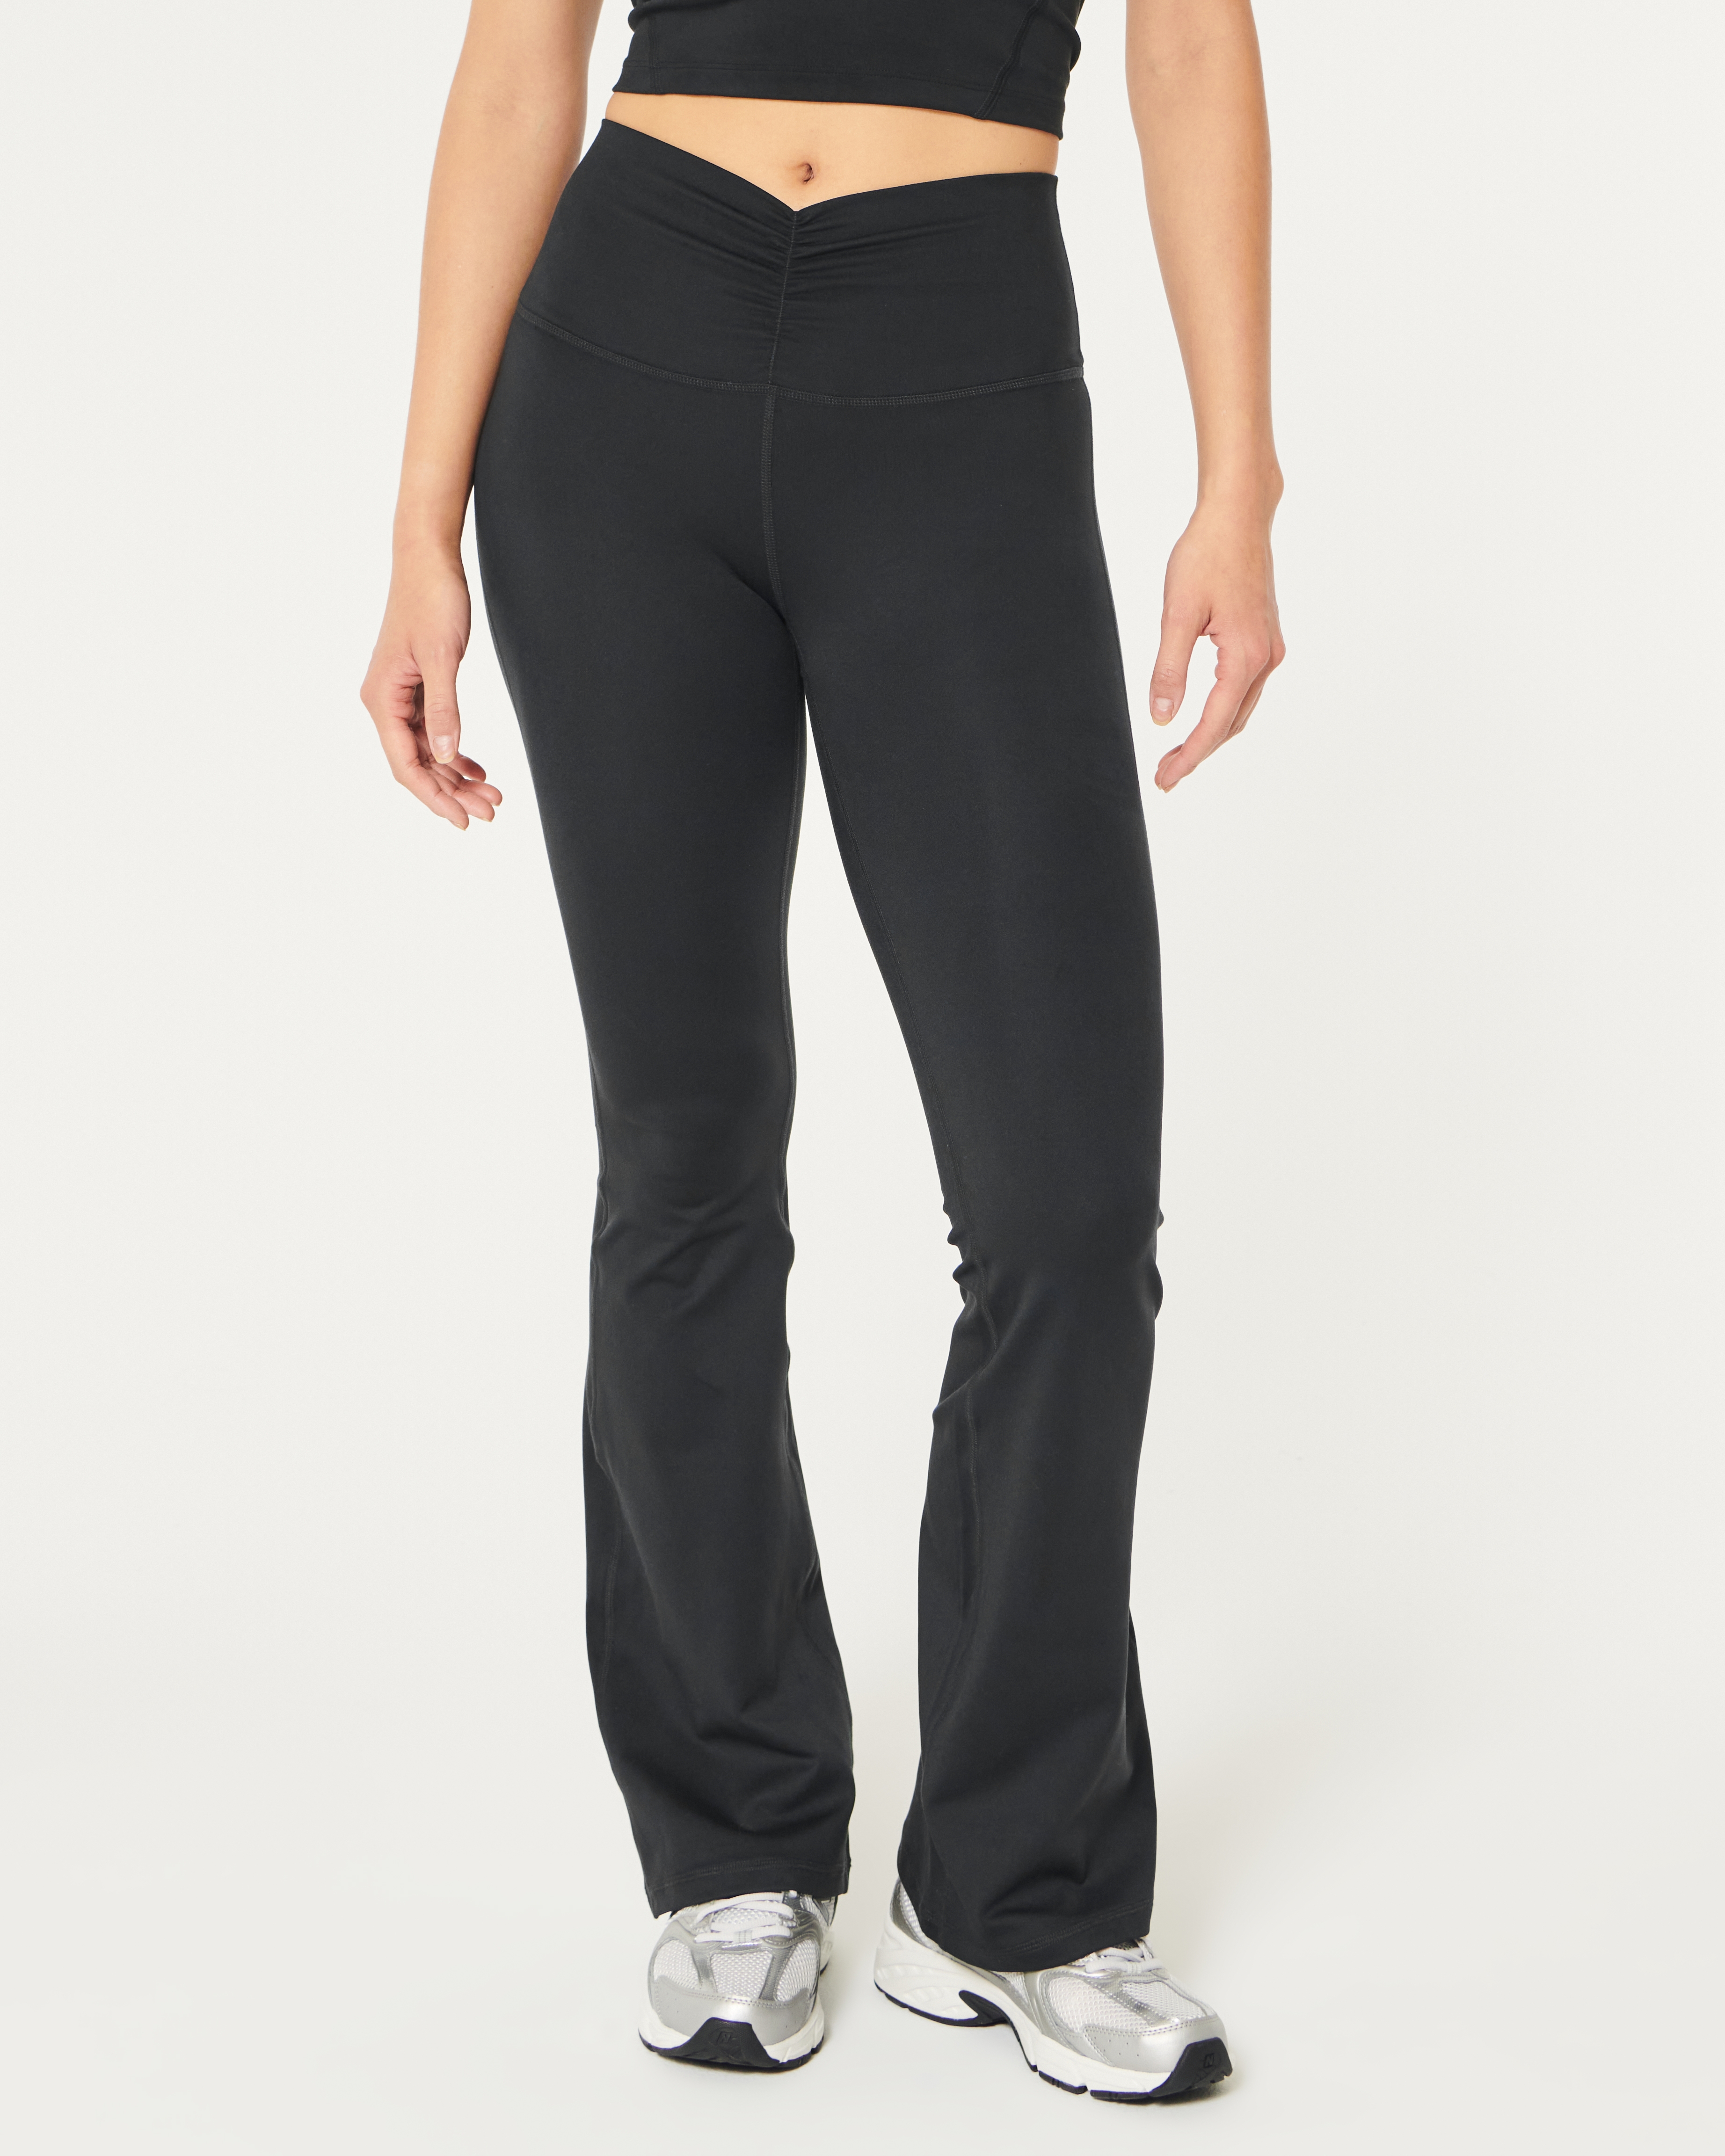 Gilly Hicks Active Recharge Ruched Waist High-Rise Flare Leggings